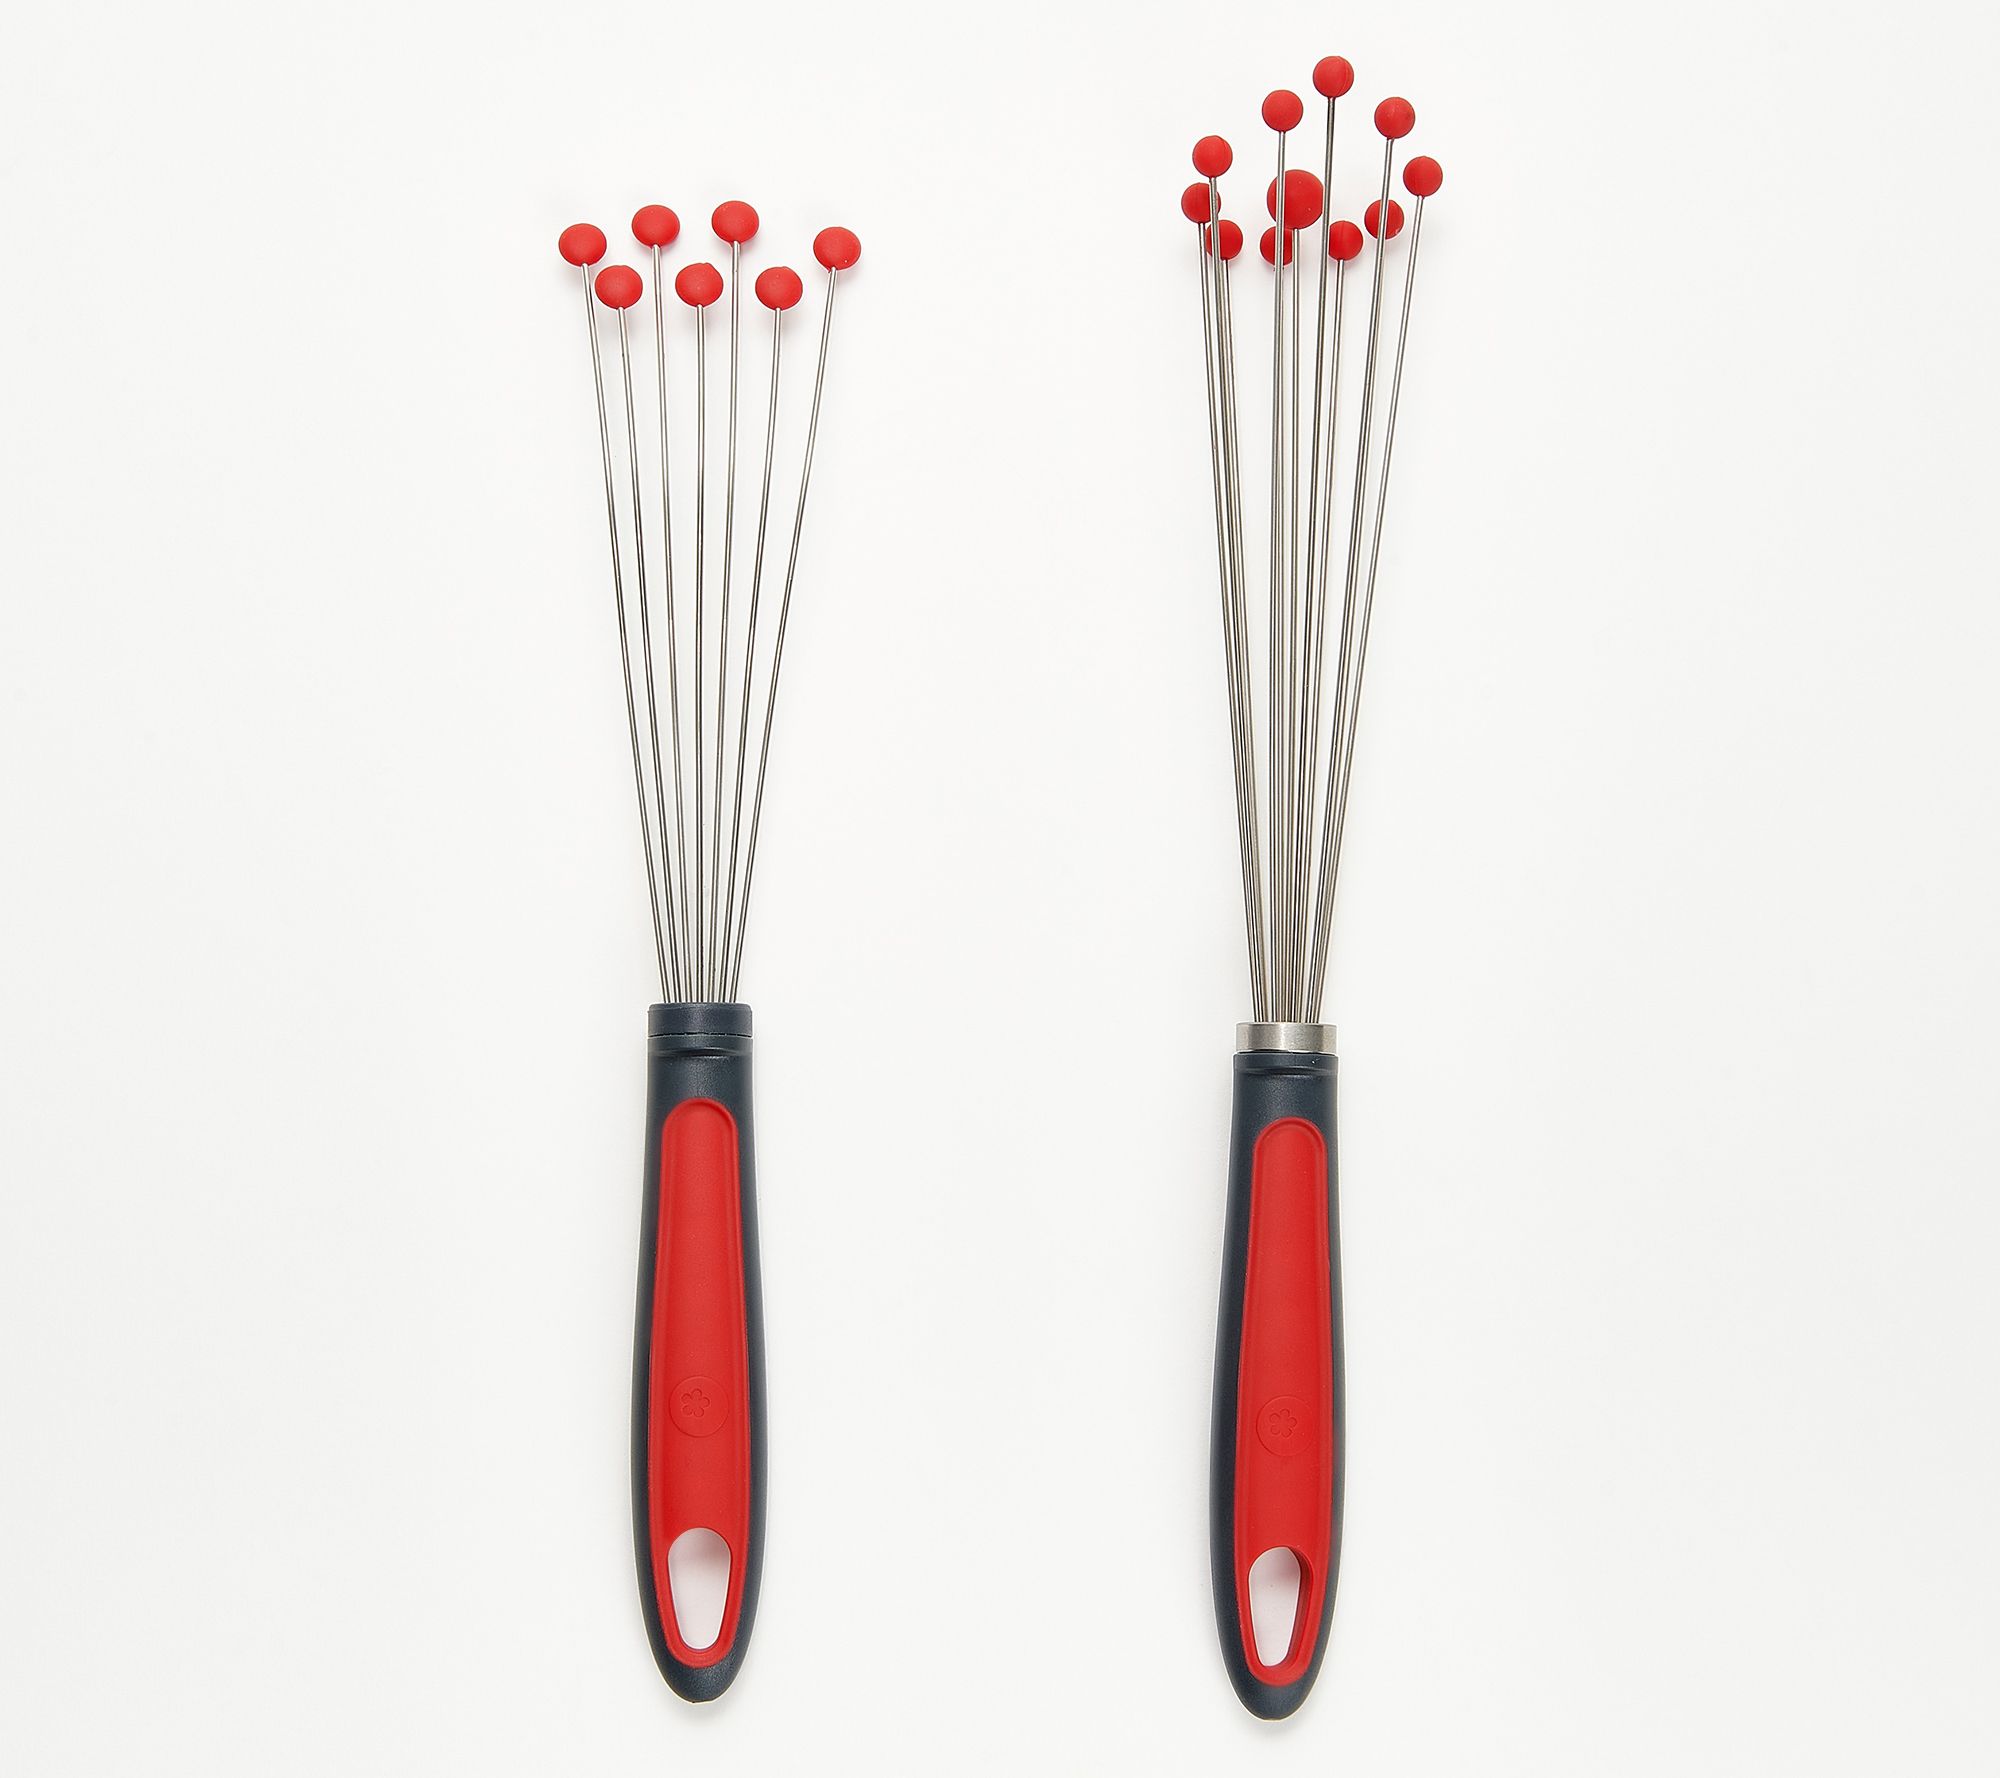 2 Pc Silicone Whisk Set